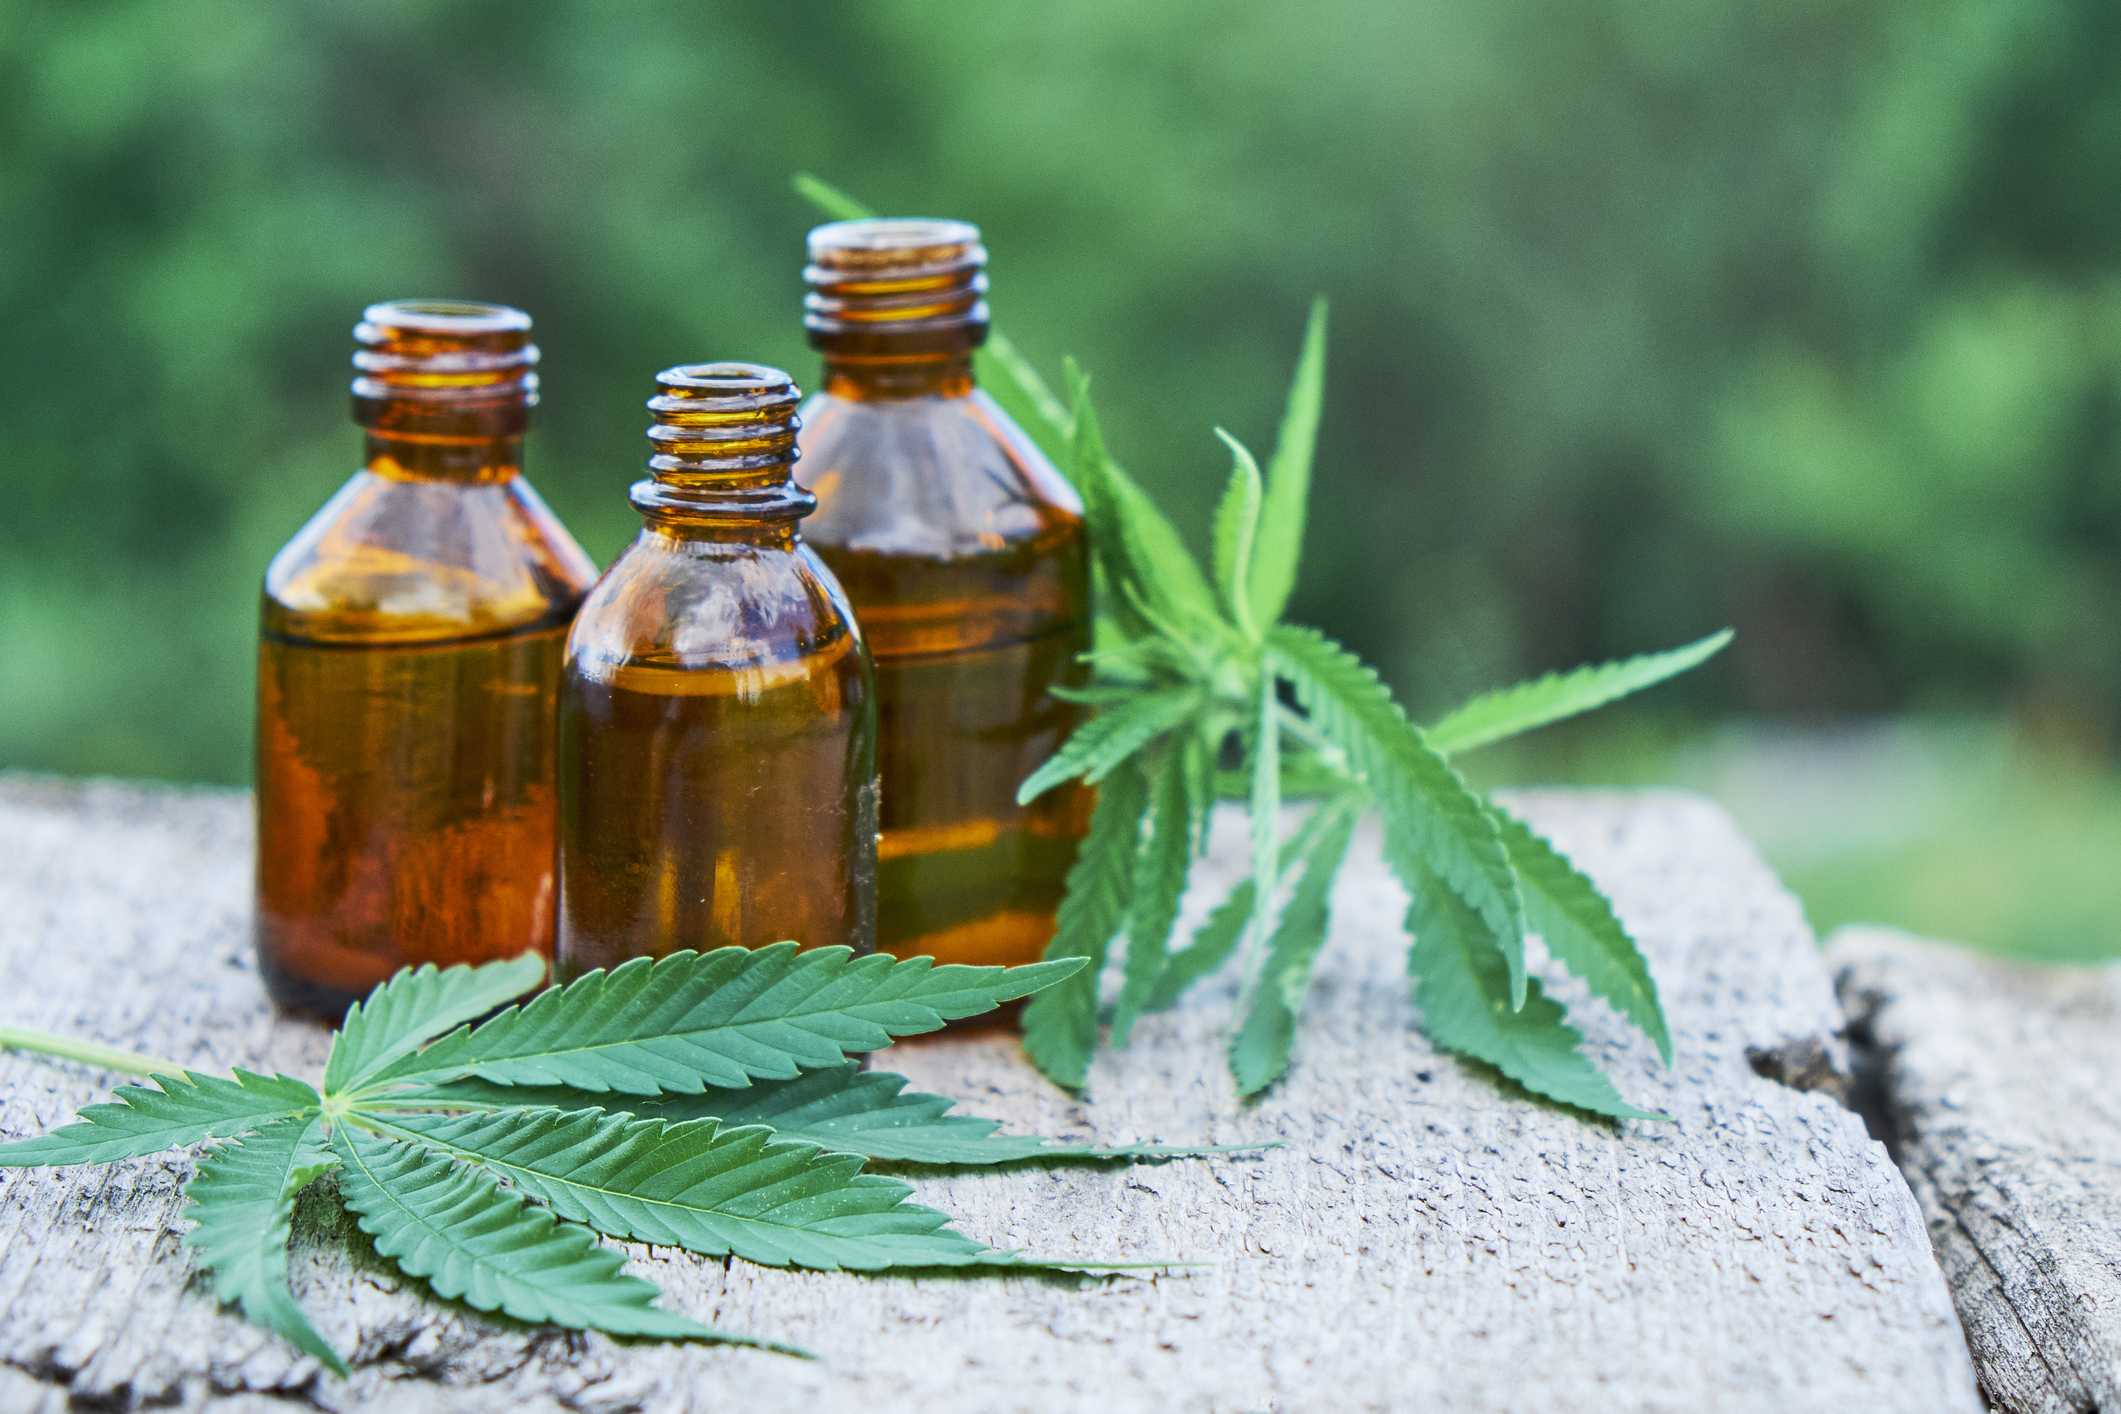 What Is A Time Frame For Healing With Cbd Oil - Cbd|Oil|Cannabidiol|Products|View|Abstract|Effects|Hemp|Cannabis|Product|Thc|Pain|People|Health|Body|Plant|Cannabinoids|Medications|Oils|Drug|Benefits|System|Study|Marijuana|Anxiety|Side|Research|Effect|Liver|Quality|Treatment|Studies|Epilepsy|Symptoms|Gummies|Compounds|Dose|Time|Inflammation|Bottle|Cbd Oil|View Abstract|Side Effects|Cbd Products|Endocannabinoid System|Multiple Sclerosis|Cbd Oils|Cbd Gummies|Cannabis Plant|Hemp Oil|Cbd Product|Hemp Plant|United States|Cytochrome P450|Many People|Chronic Pain|Nuleaf Naturals|Royal Cbd|Full-Spectrum Cbd Oil|Drug Administration|Cbd Oil Products|Medical Marijuana|Drug Test|Heavy Metals|Clinical Trial|Clinical Trials|Cbd Oil Side|Rating Highlights|Wide Variety|Animal Studies